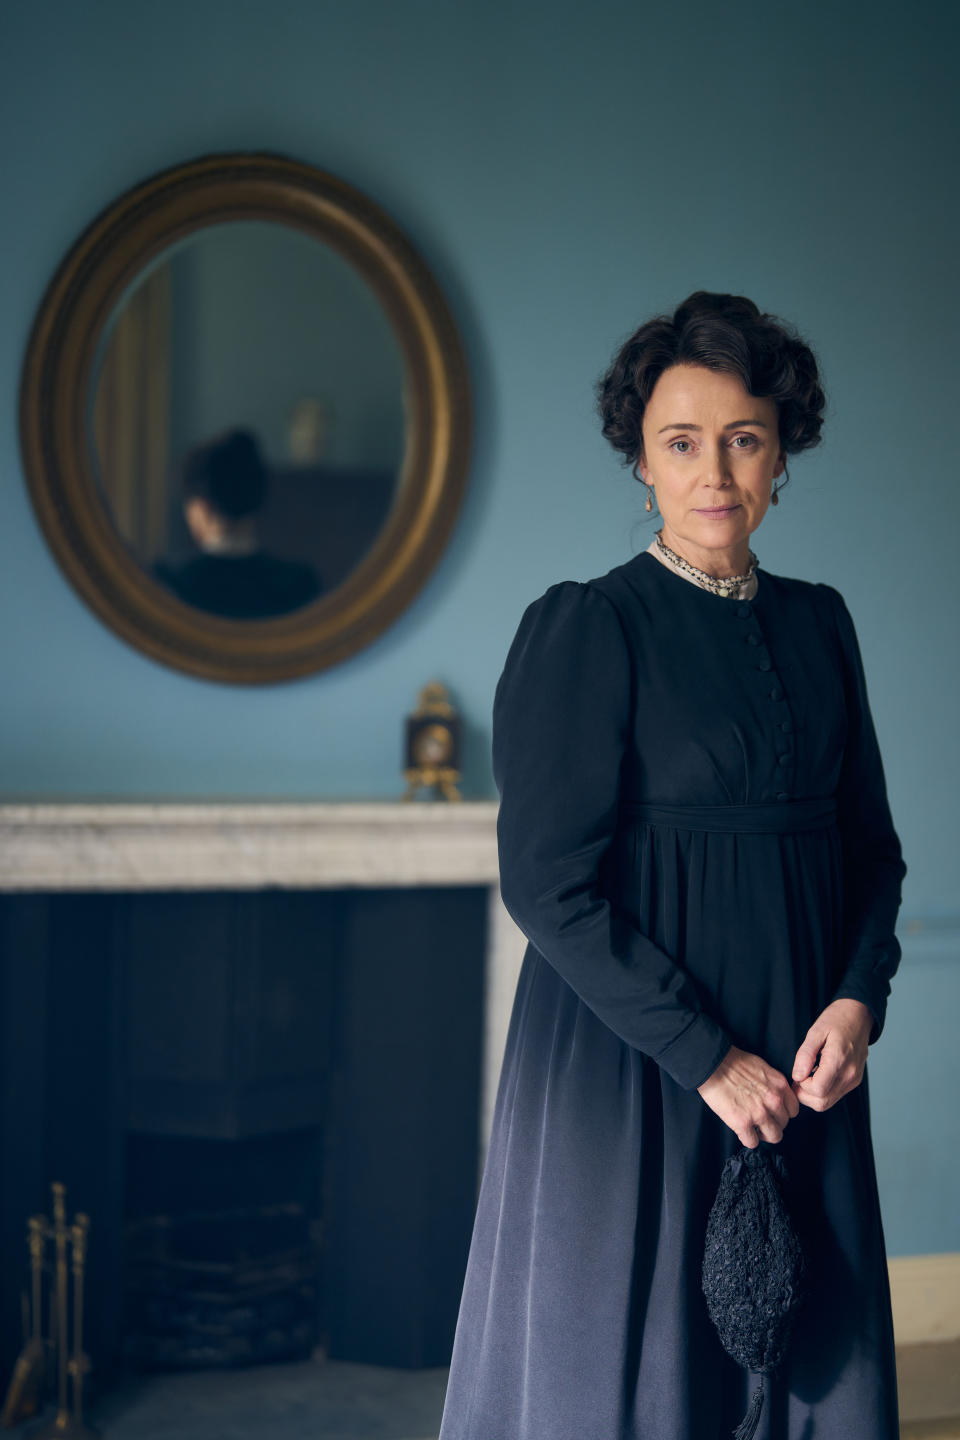 MASTERPIECE
"Miss Austen"

Coming Soon to MASTERPIECE on PBS

Shown: Keeley Hawes as Cassandra Austen

For editorial use only.

(C) Robert Viglasky Photography